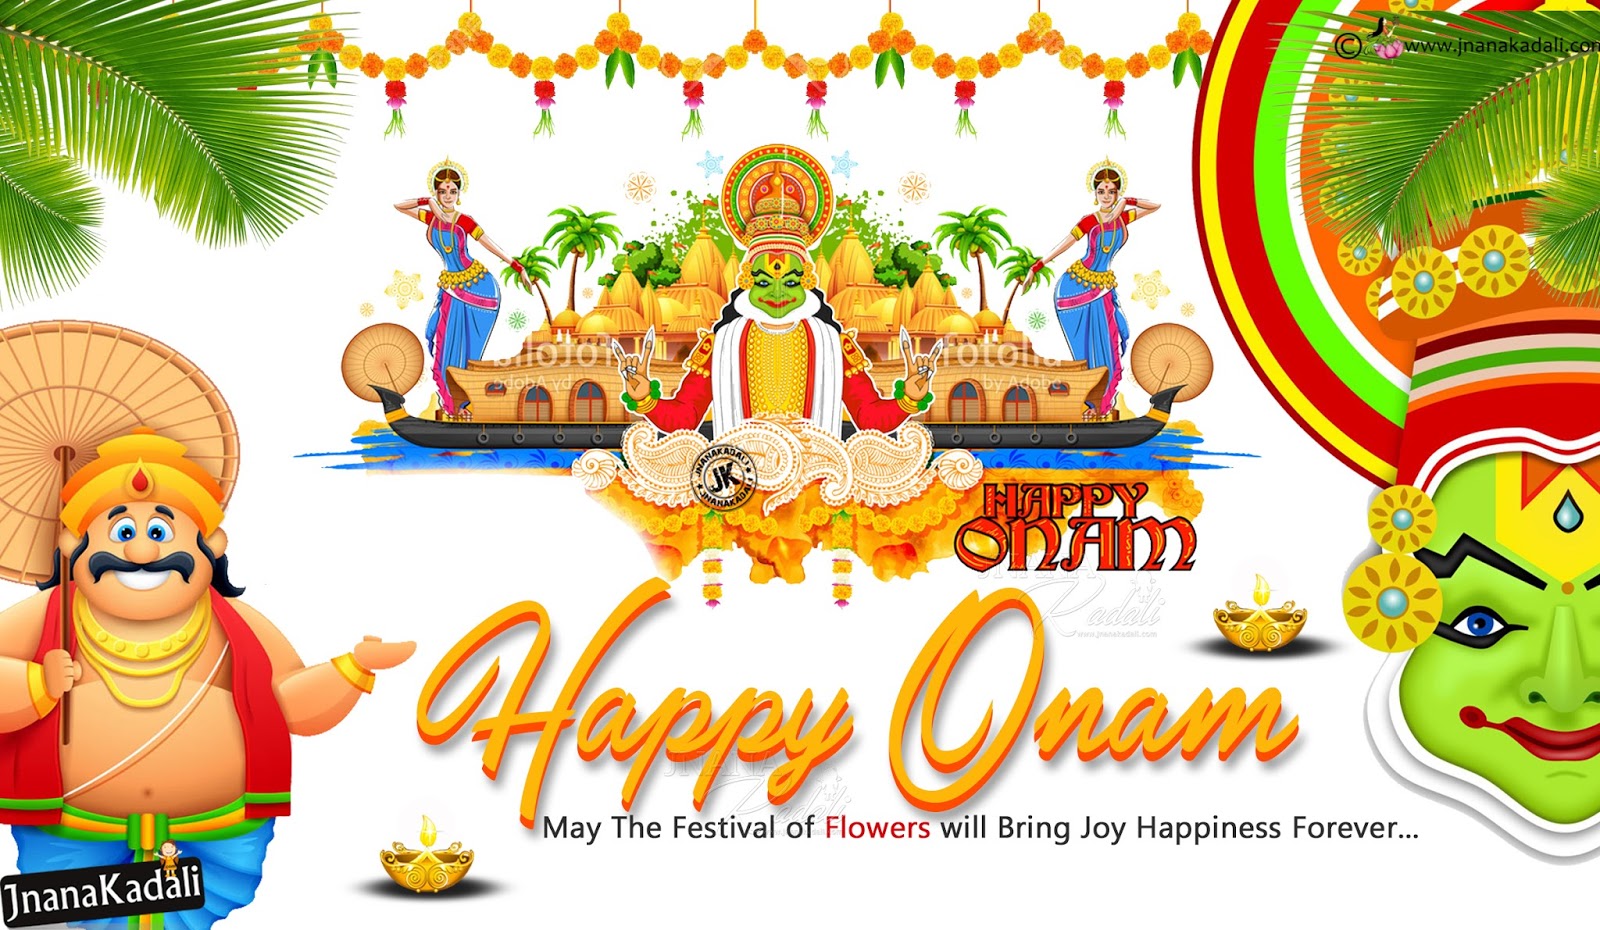 Onam English Greetings With Hd Wallpapers Free Download - Onam Hd Wallpapers Free Download , HD Wallpaper & Backgrounds